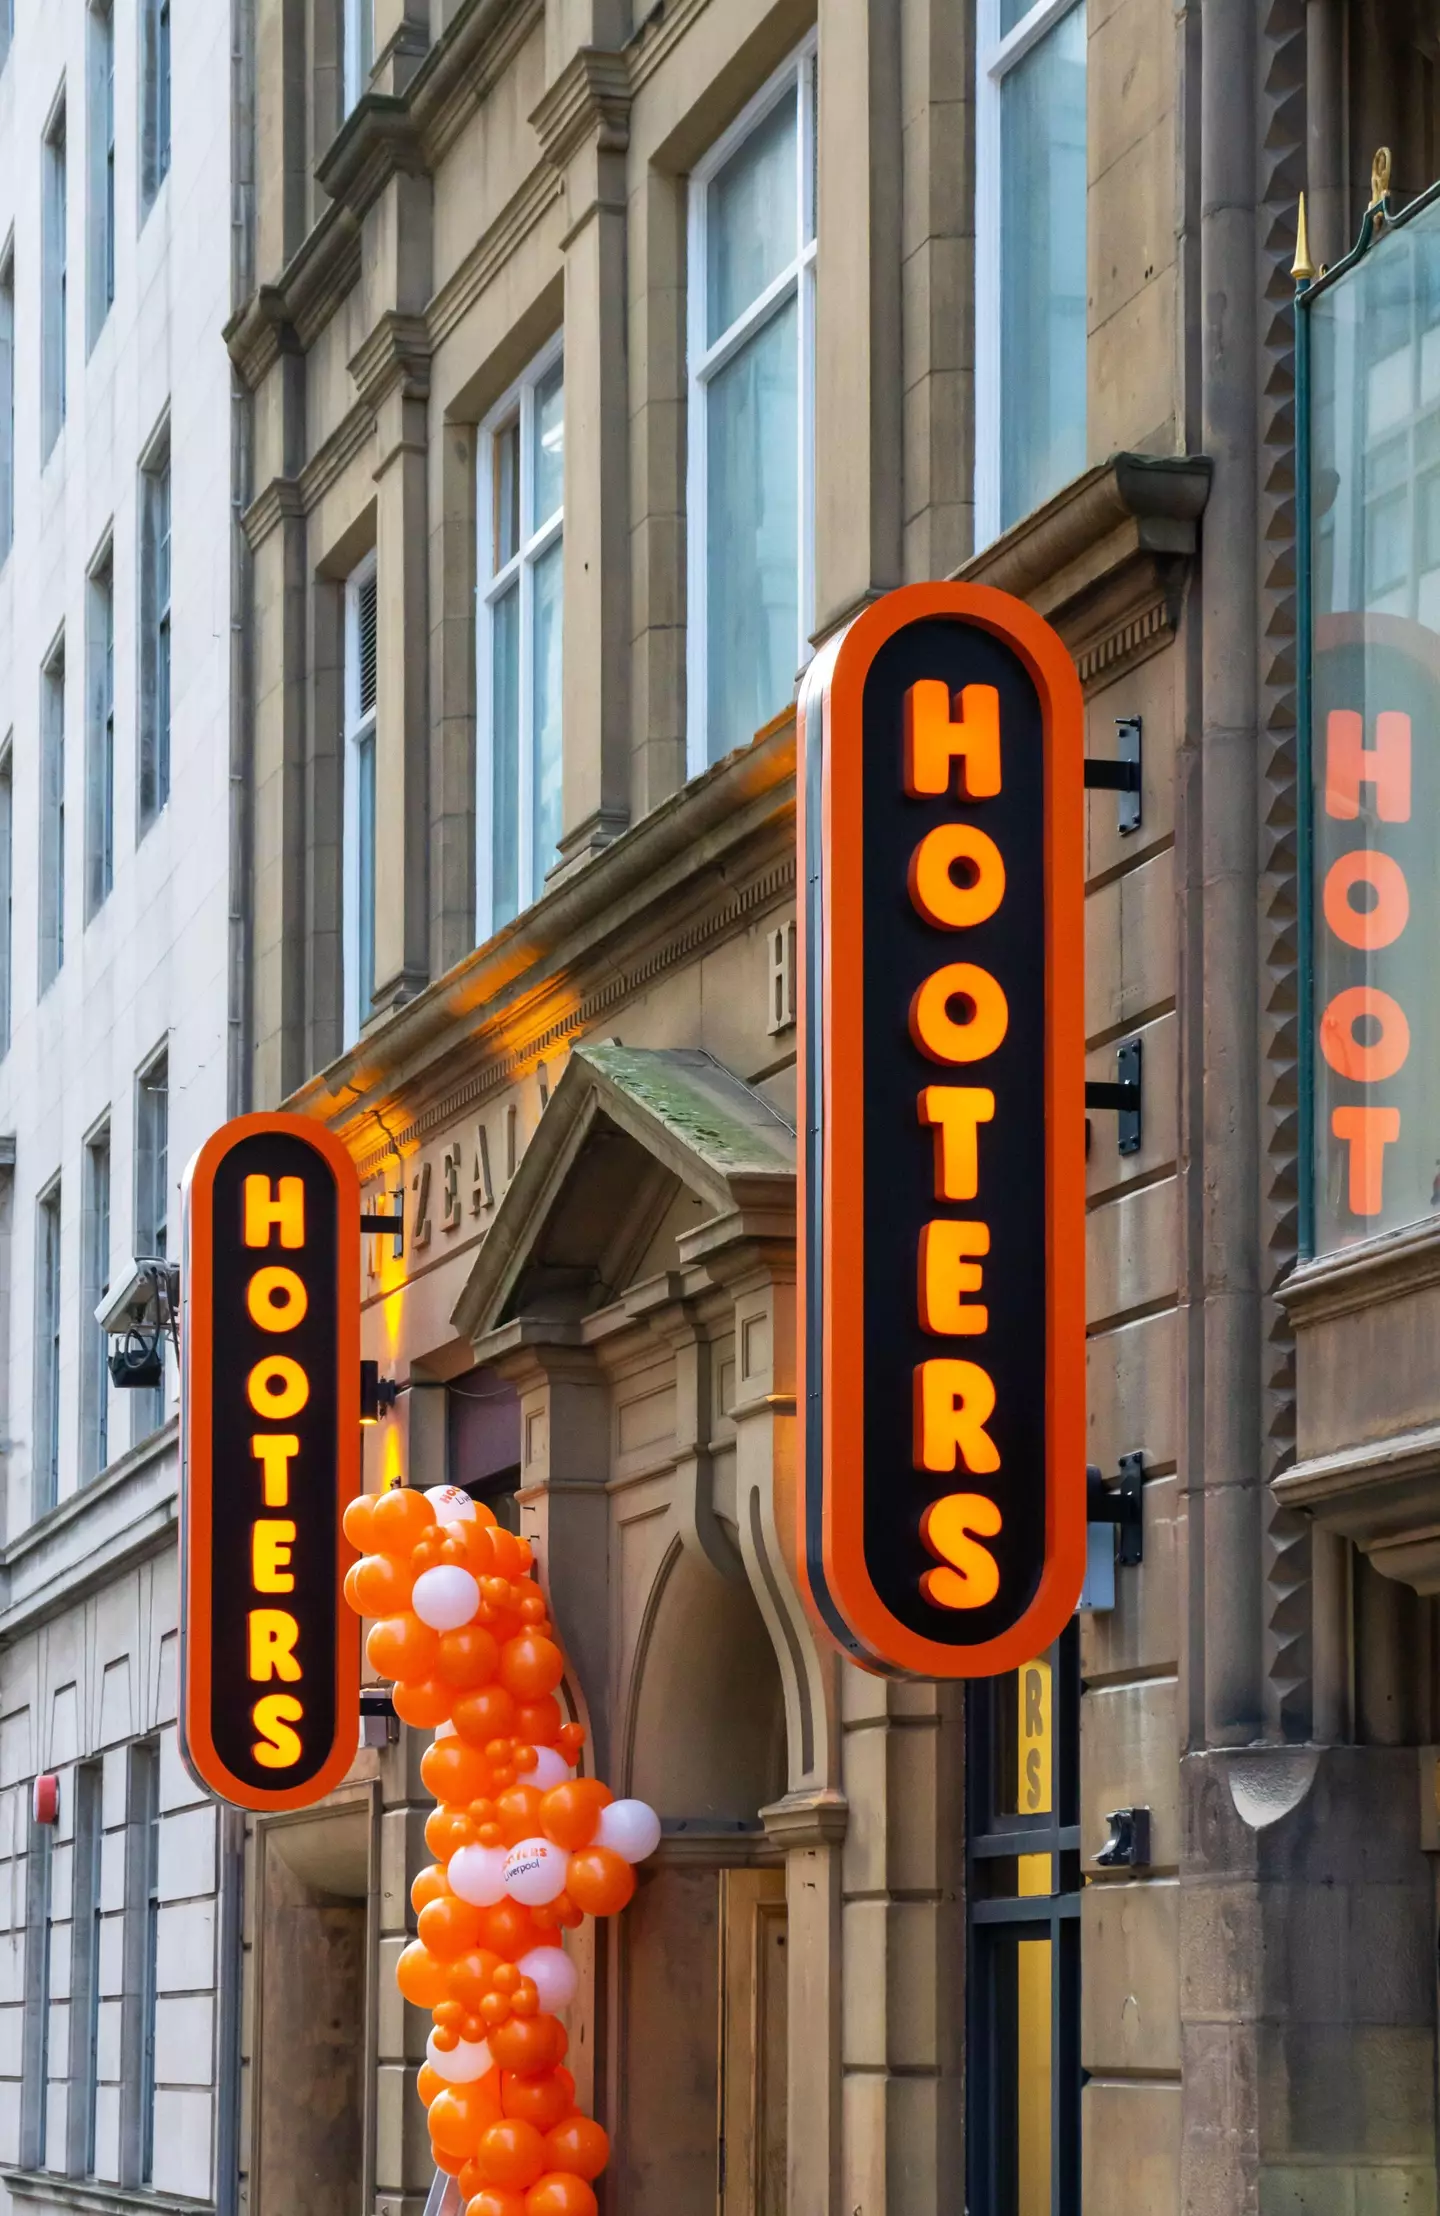 Hooters opened in Liverpool late last year.